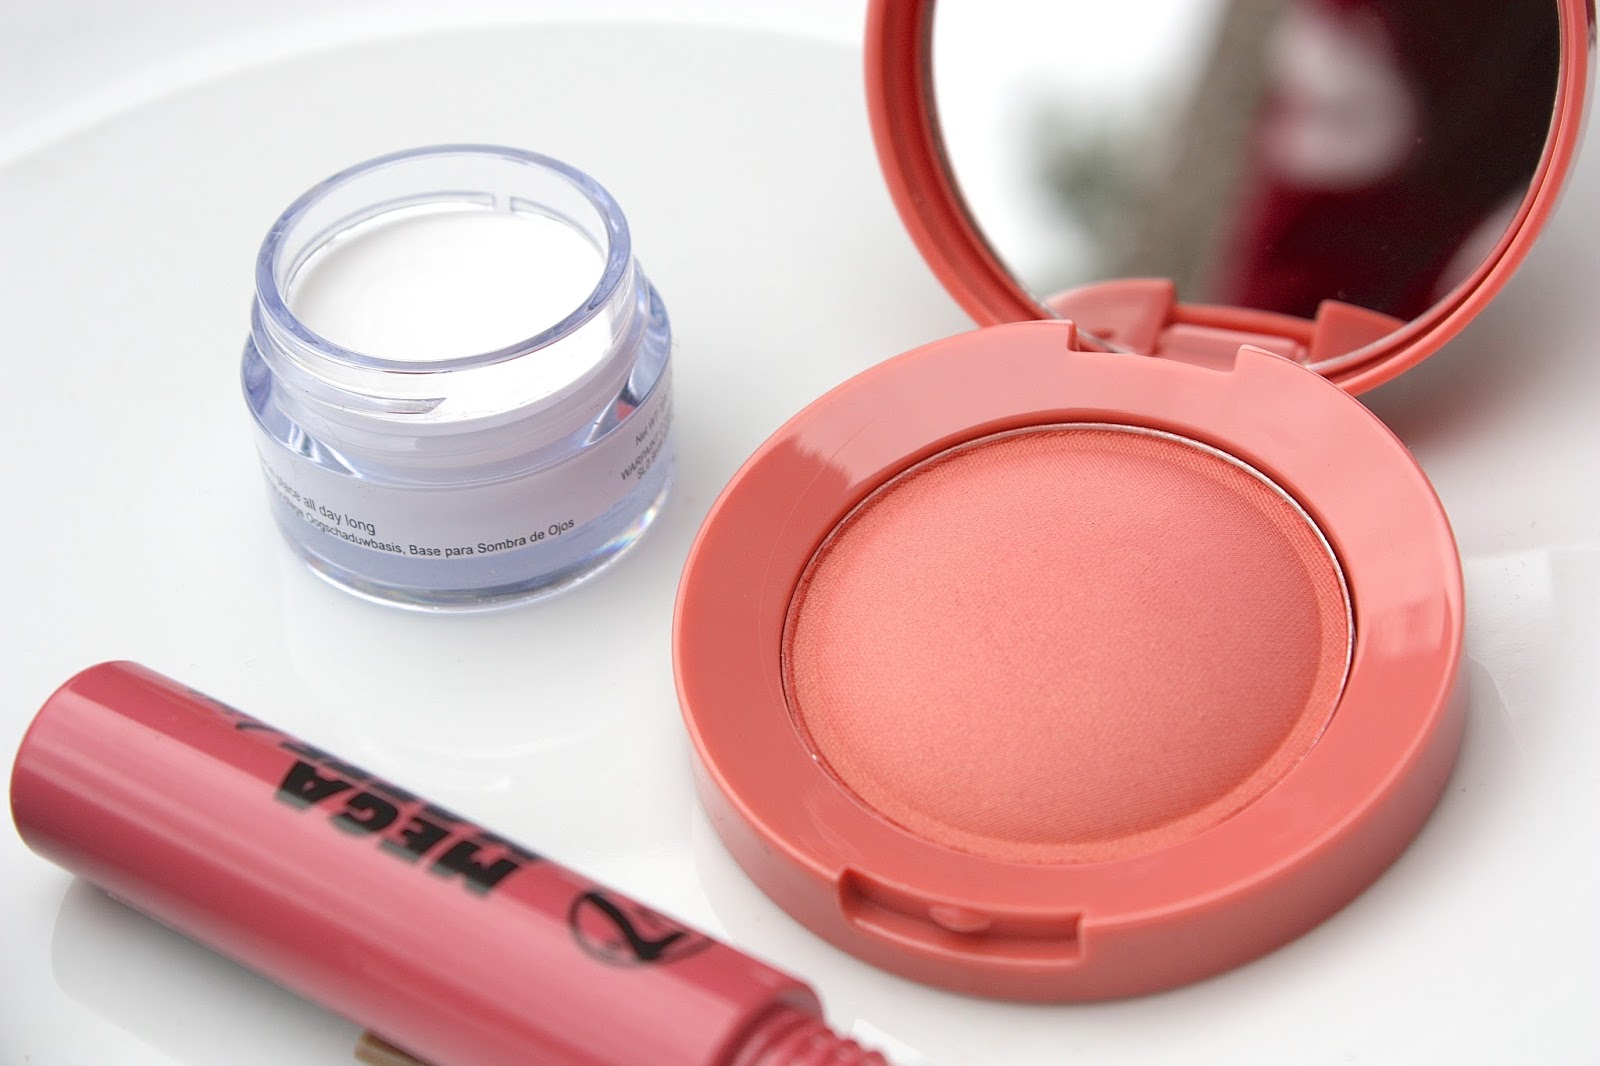 Throw me Something Beautiful: Focus: W7 Cosmetics Review